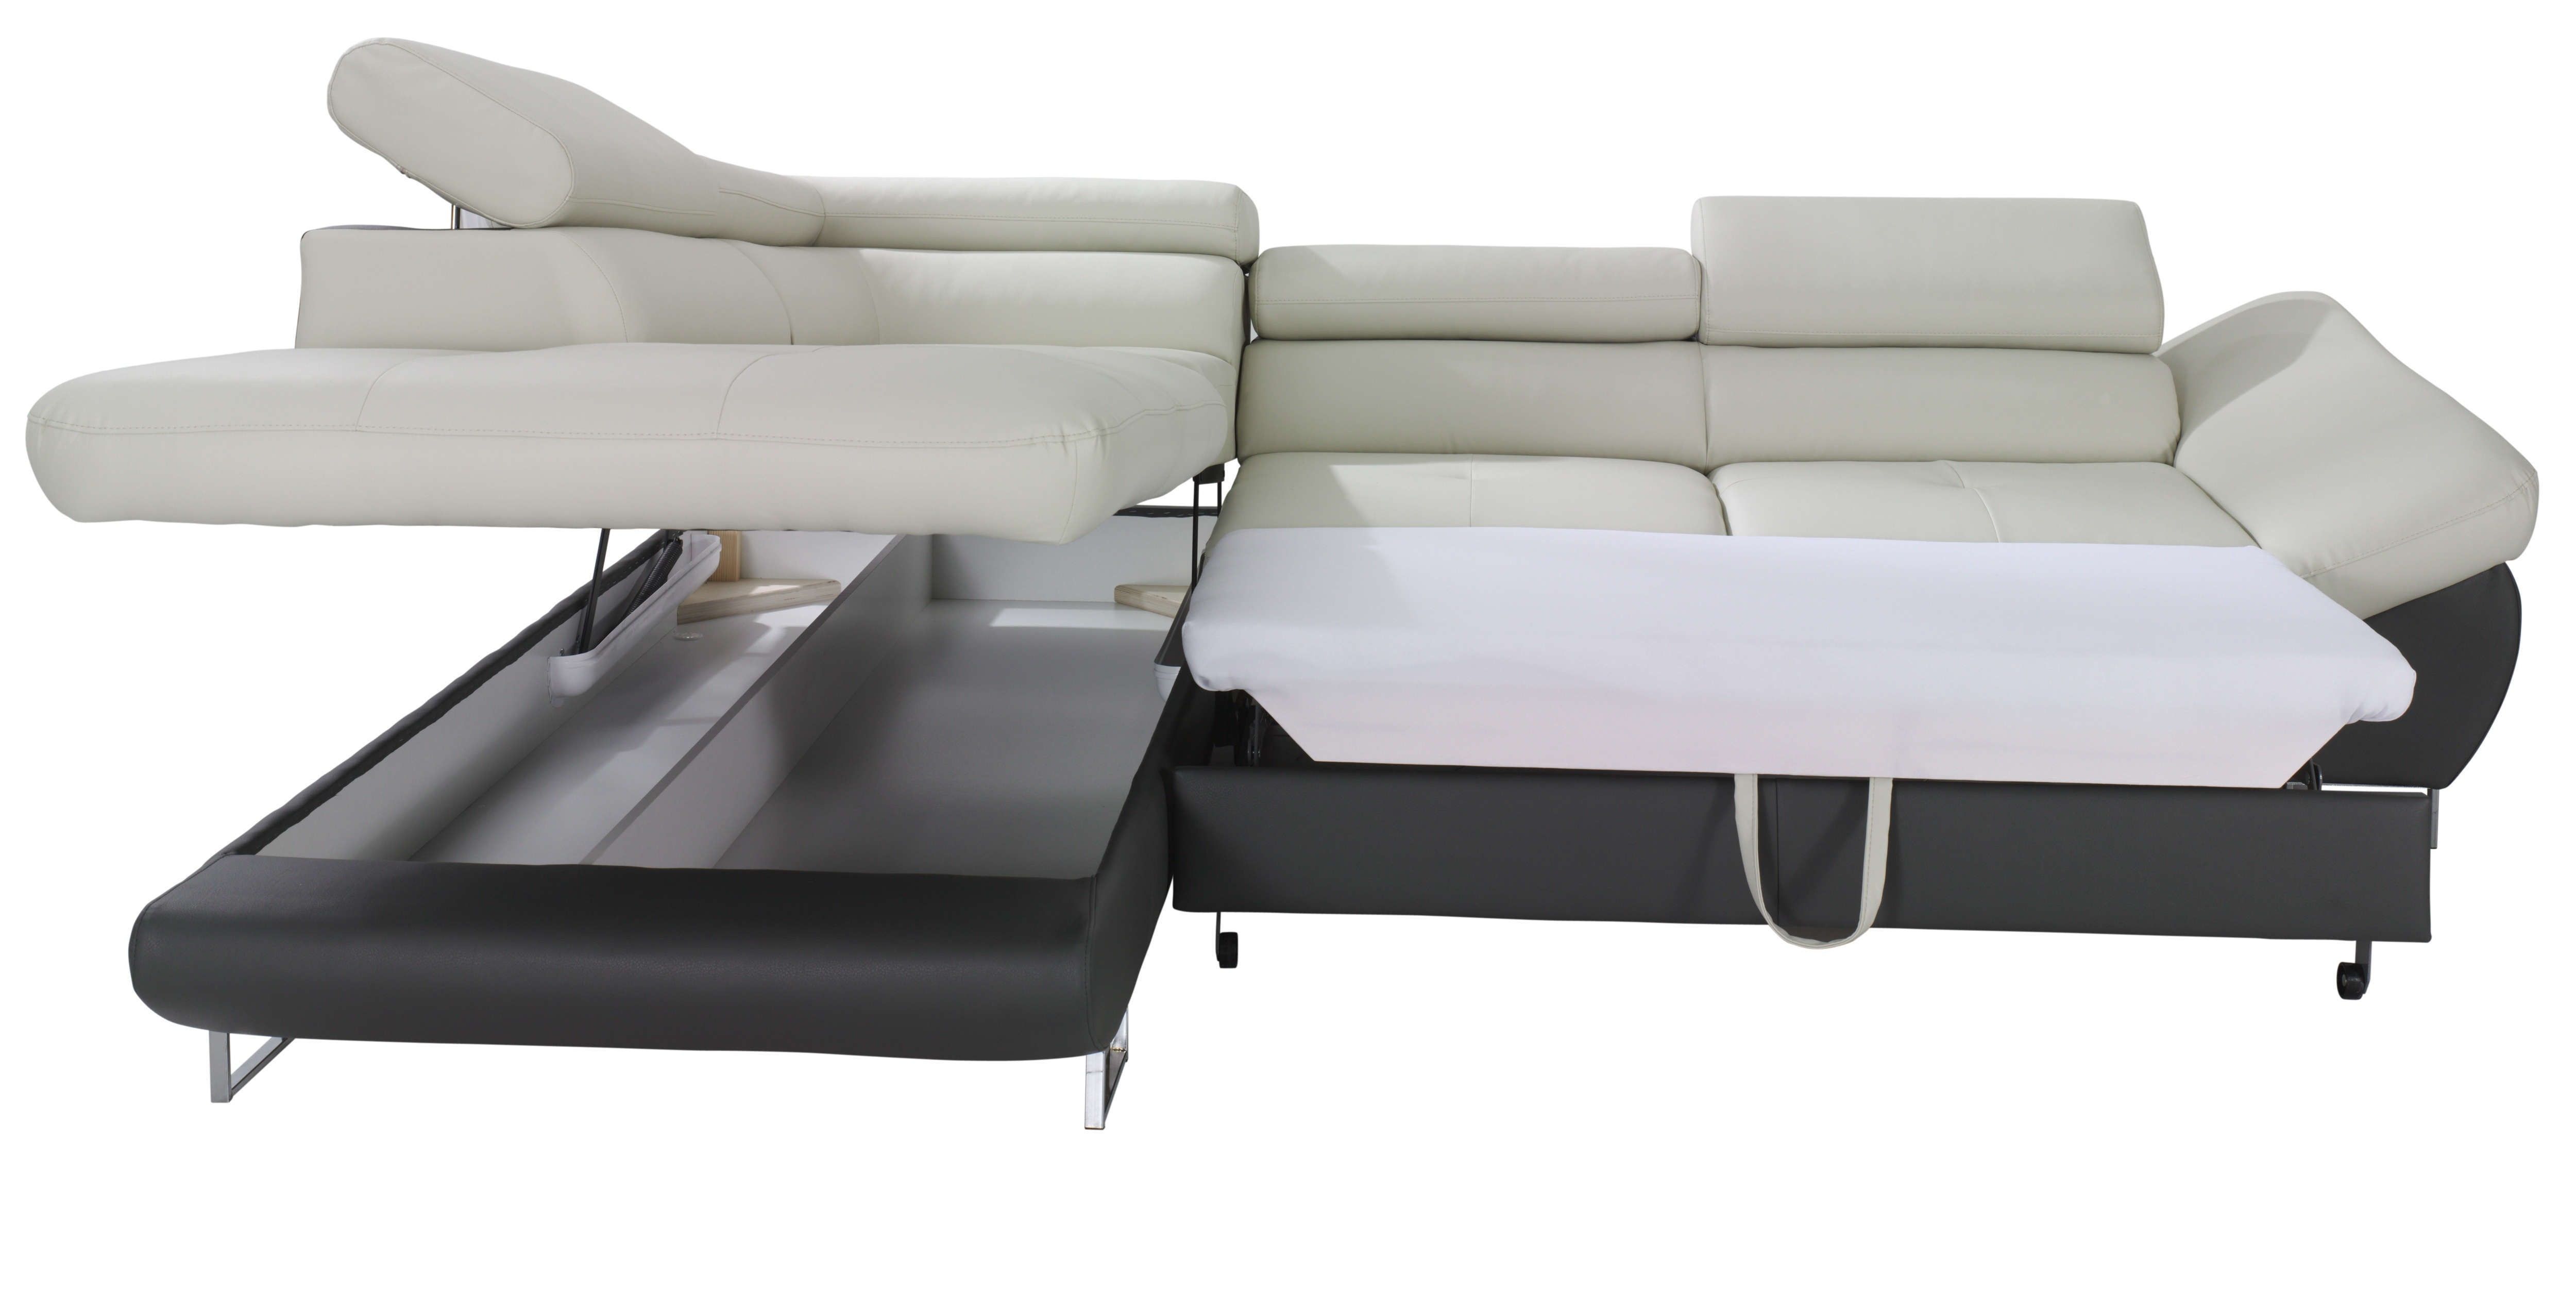 Modern Concept Sectional Sofas Nj With Sofa Bed Ido Furniture Inside Newfoundland Sectional Sofas (View 10 of 10)